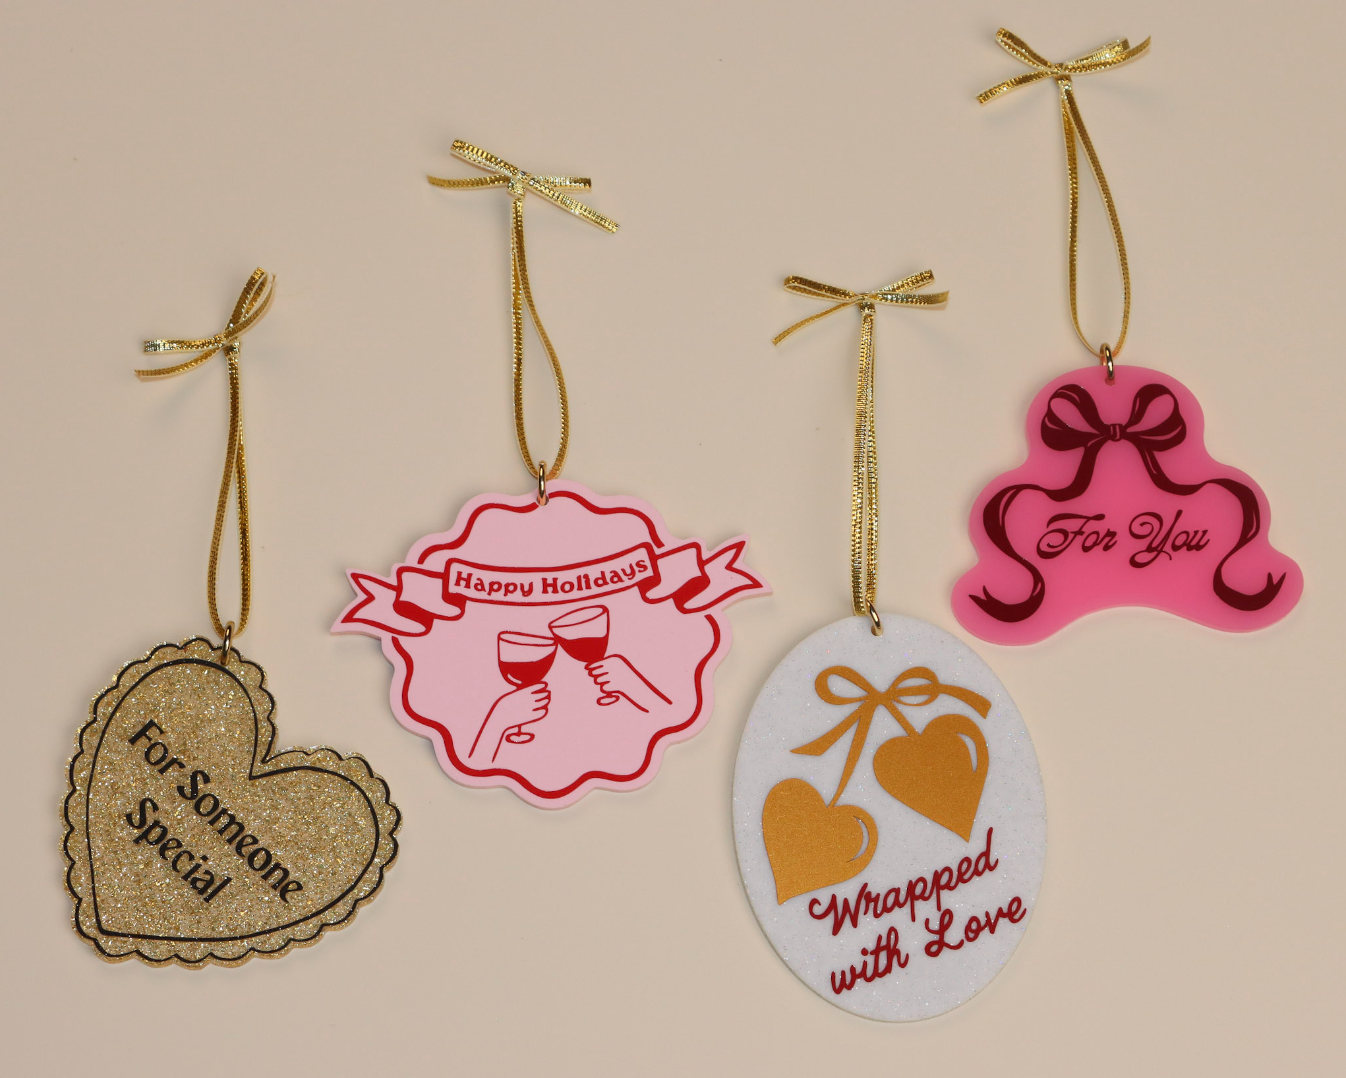 Happy Holiday Gift Tags - Pack of 4